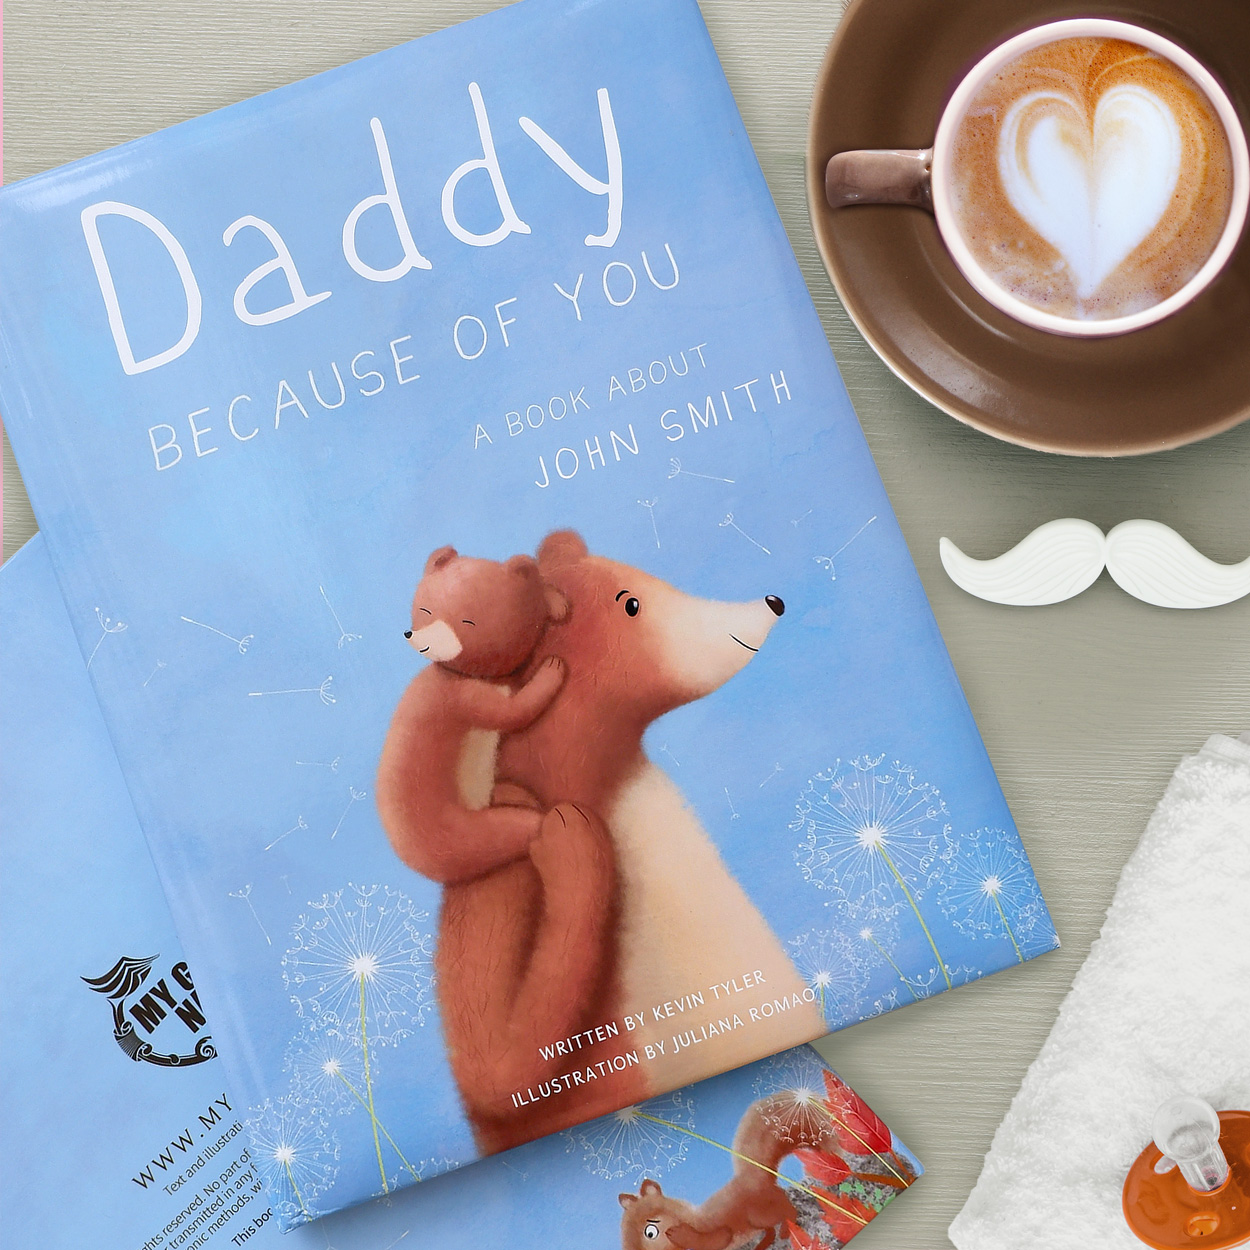 Our much adored Daddy Book!